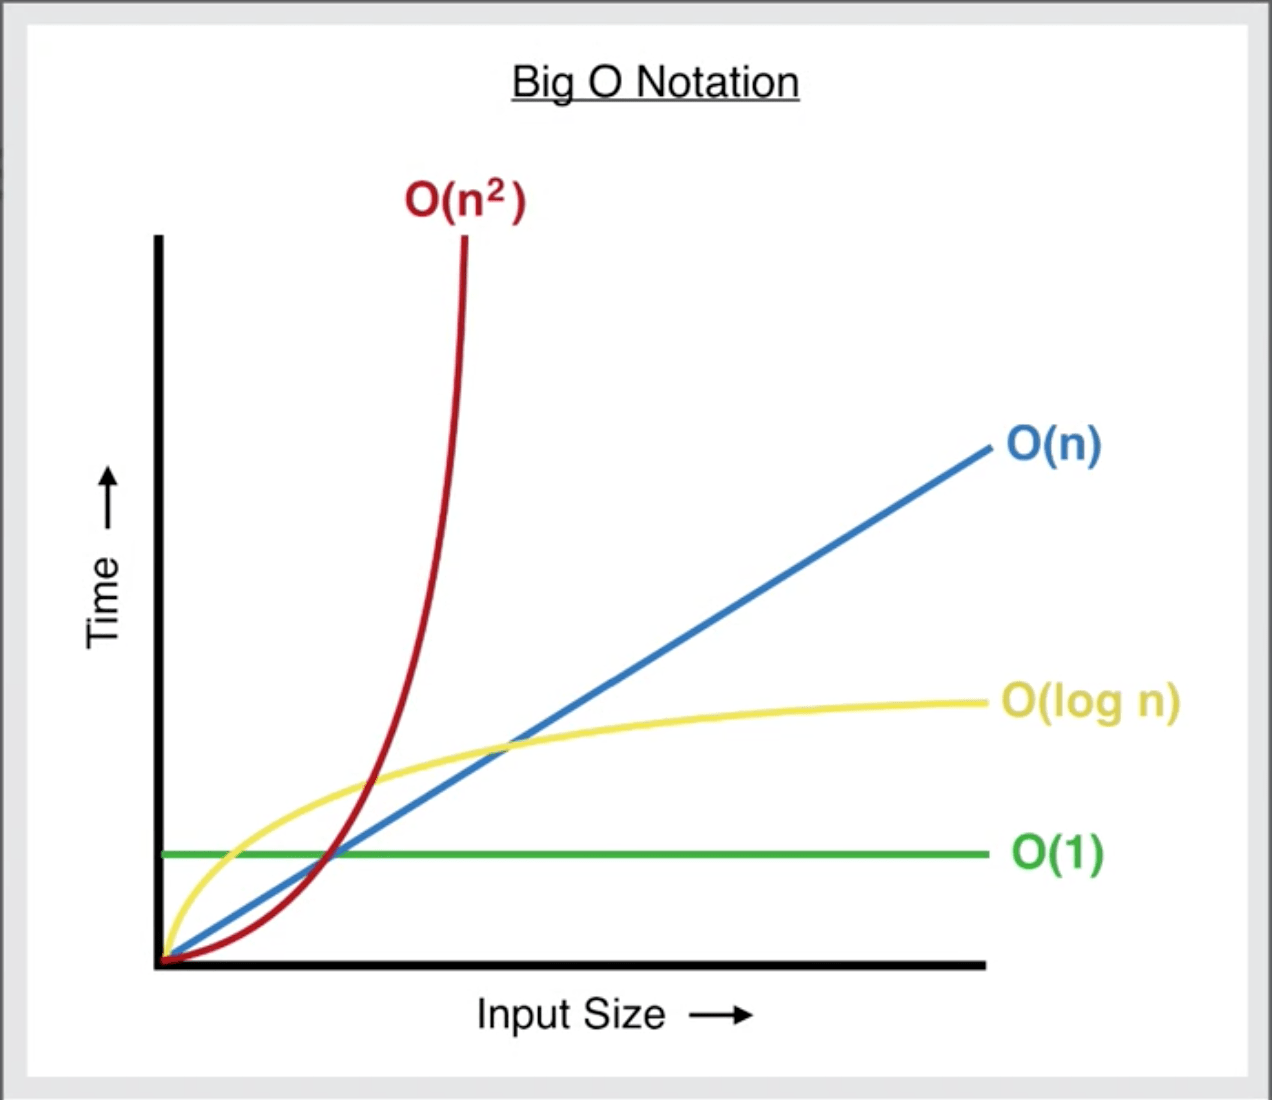 Big O notation : Time complexity of an algorithm